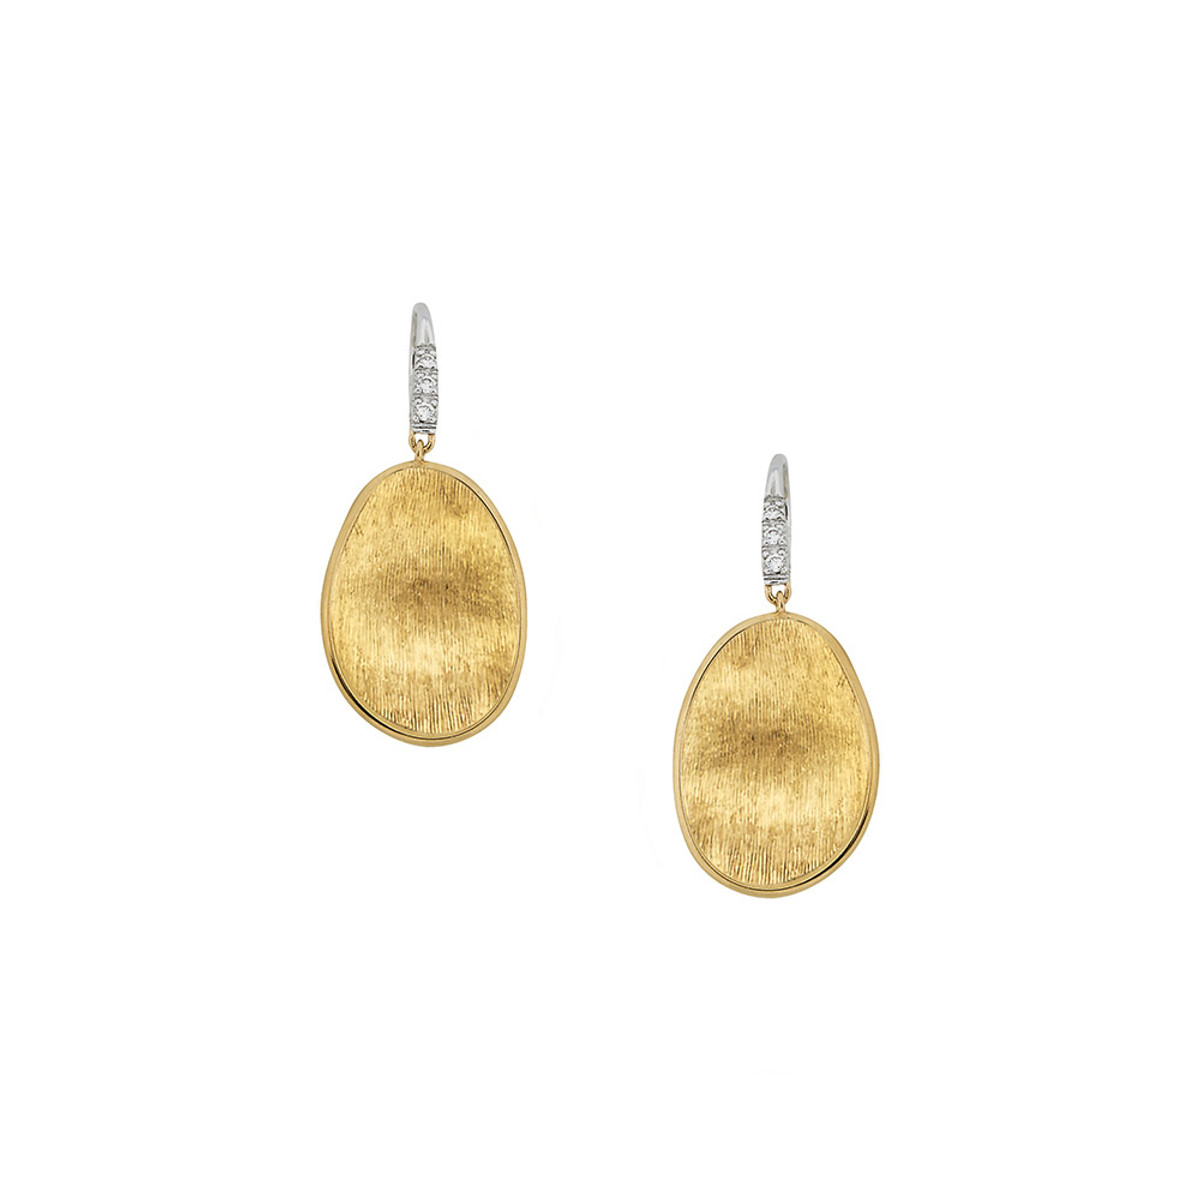 Marco Bicego 18KT Yellow Gold & Diamond Pave Small French Wire Earrings-DEQTF1359 Product Image